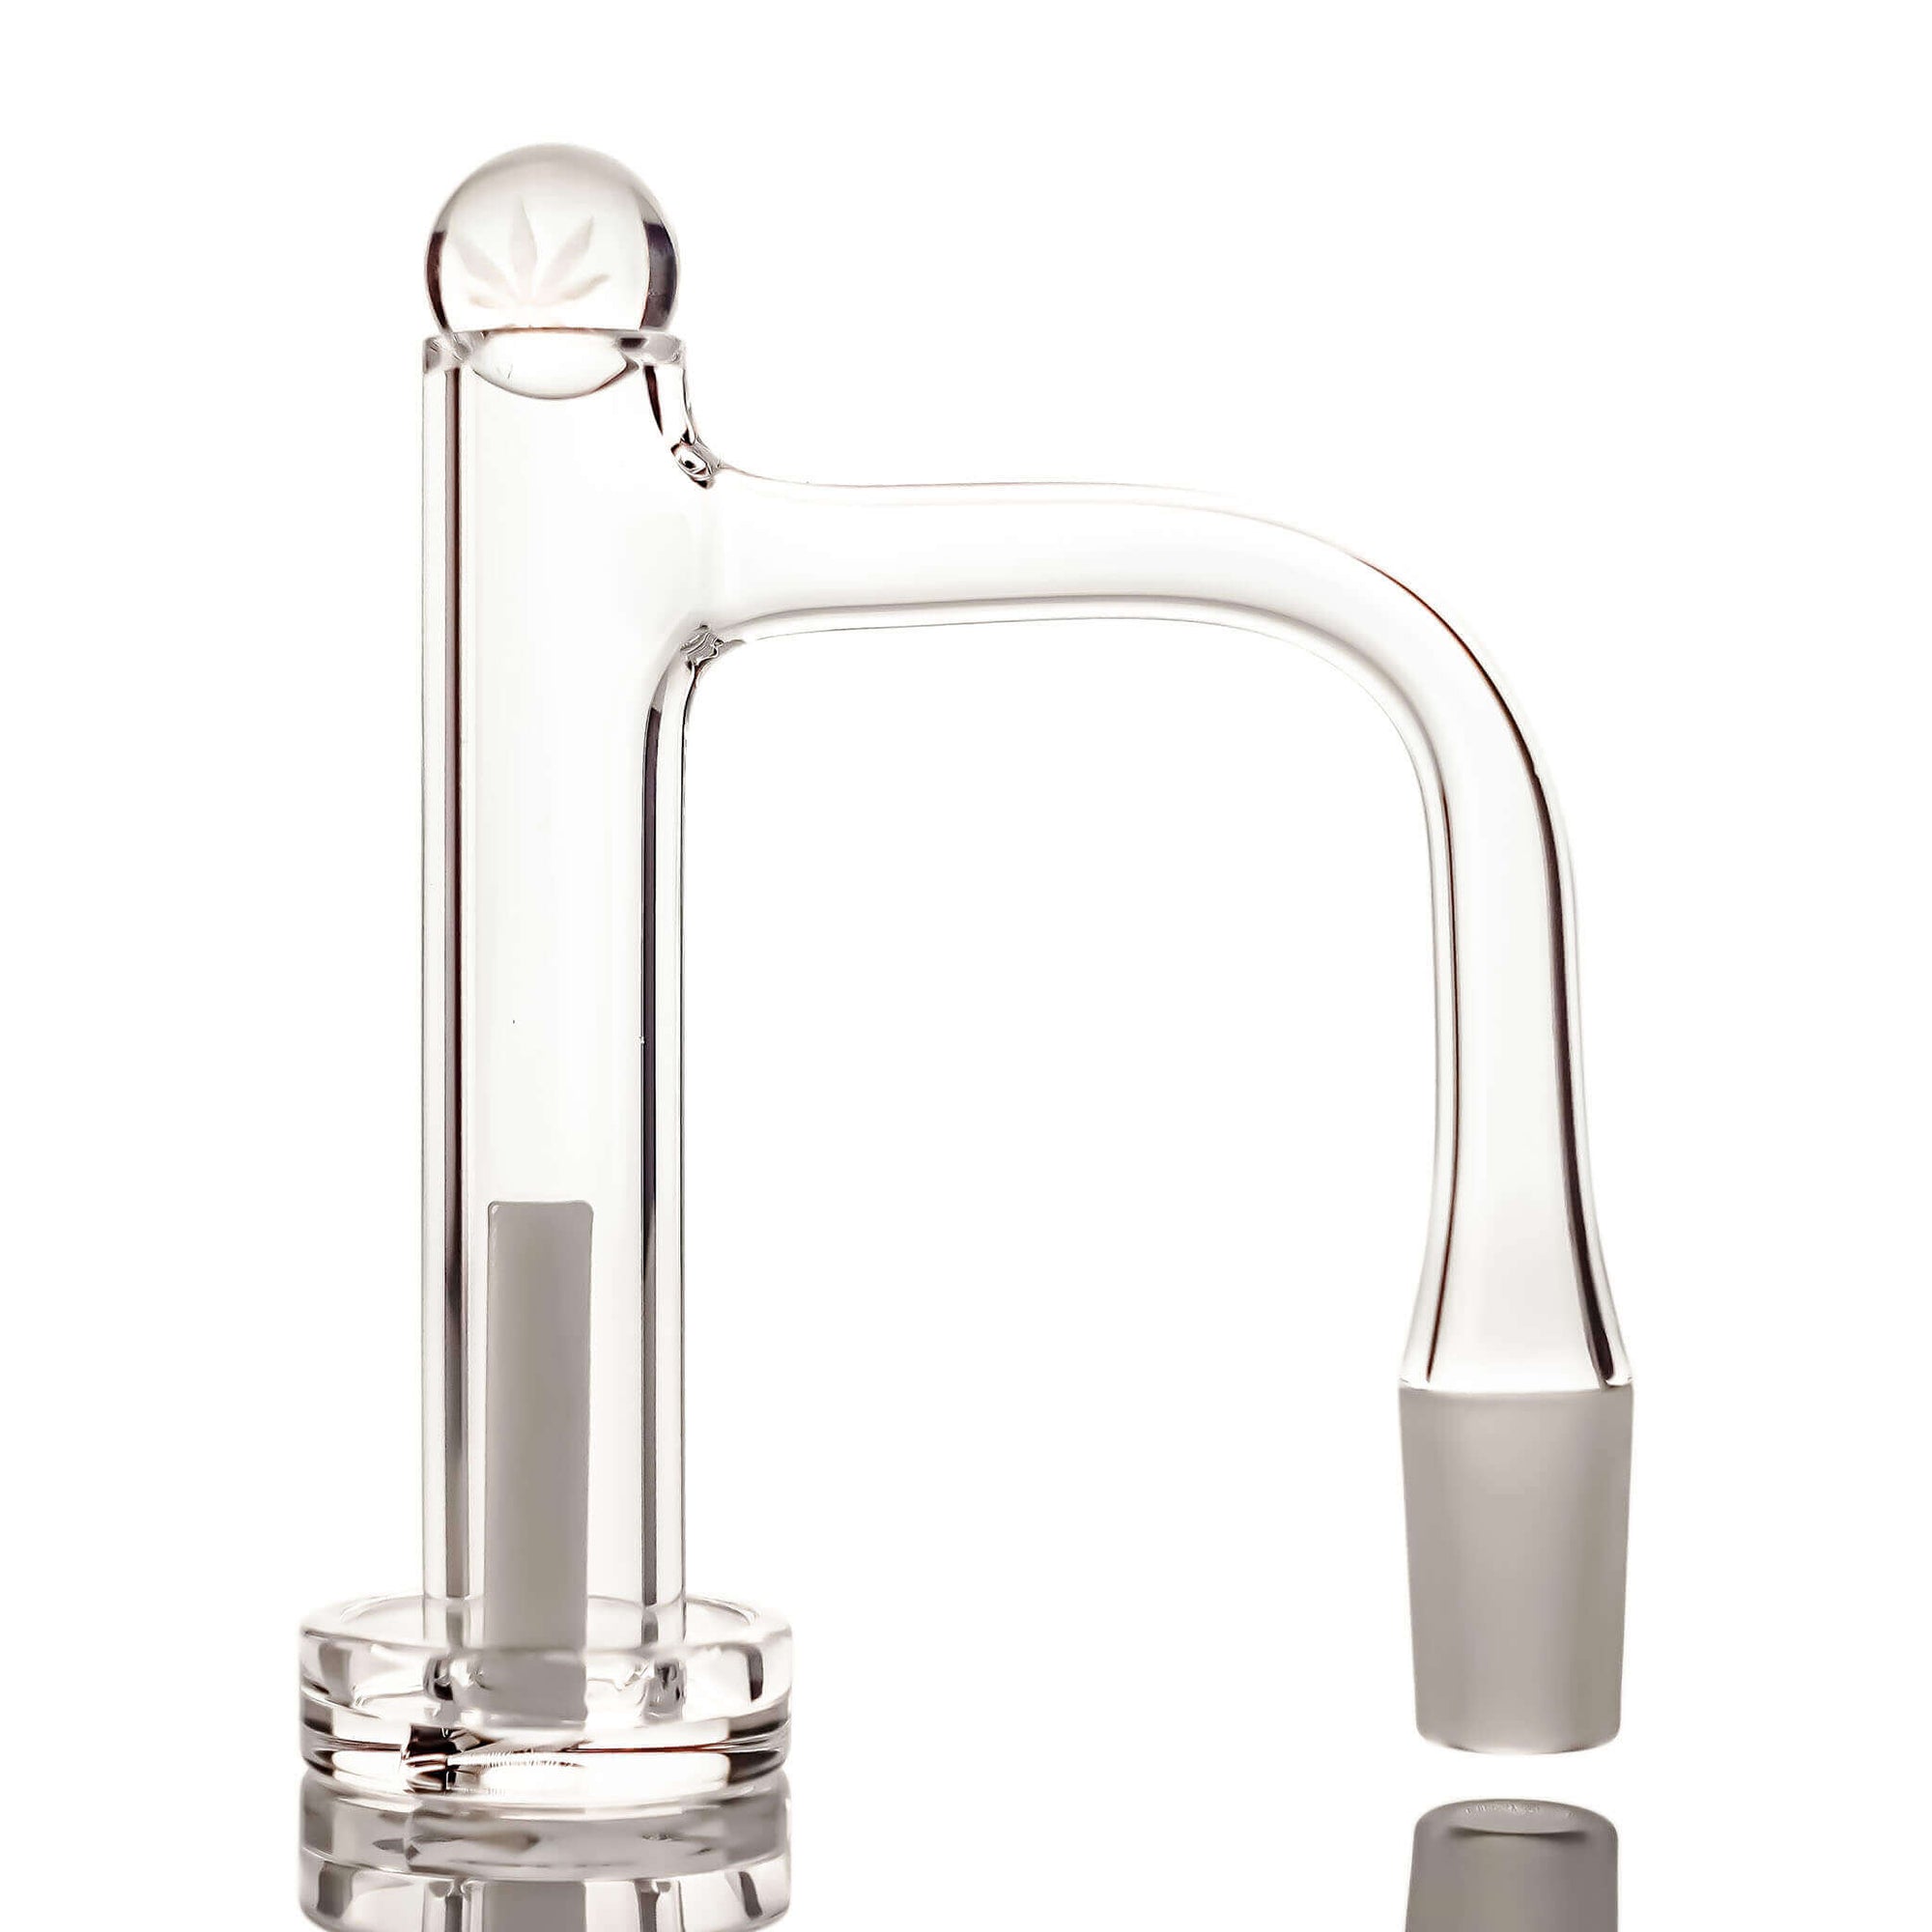 Showerhead Bubbler Control Tower Dab Kit | Complete Dab Kit Profile View | the dabbing specialists